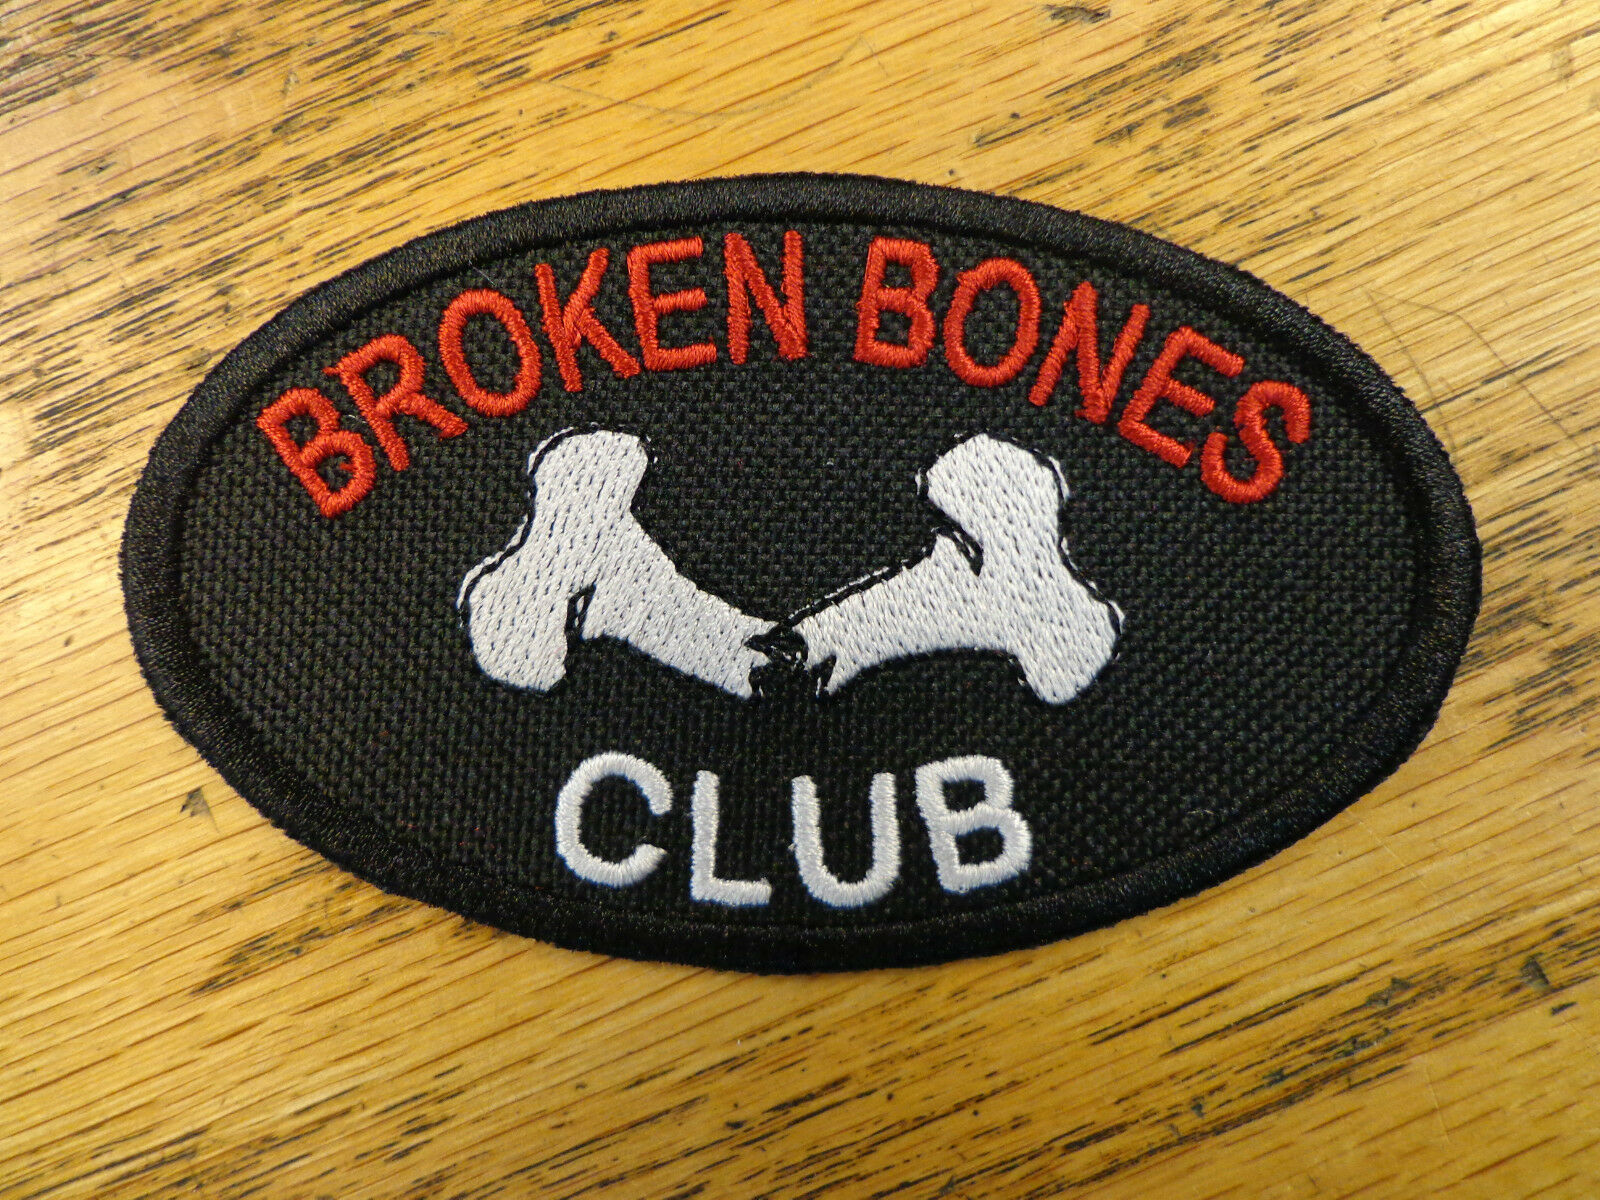 Broken Bones Club Embroidered Patch Vest Patch Outlaw Mc Made In Usa